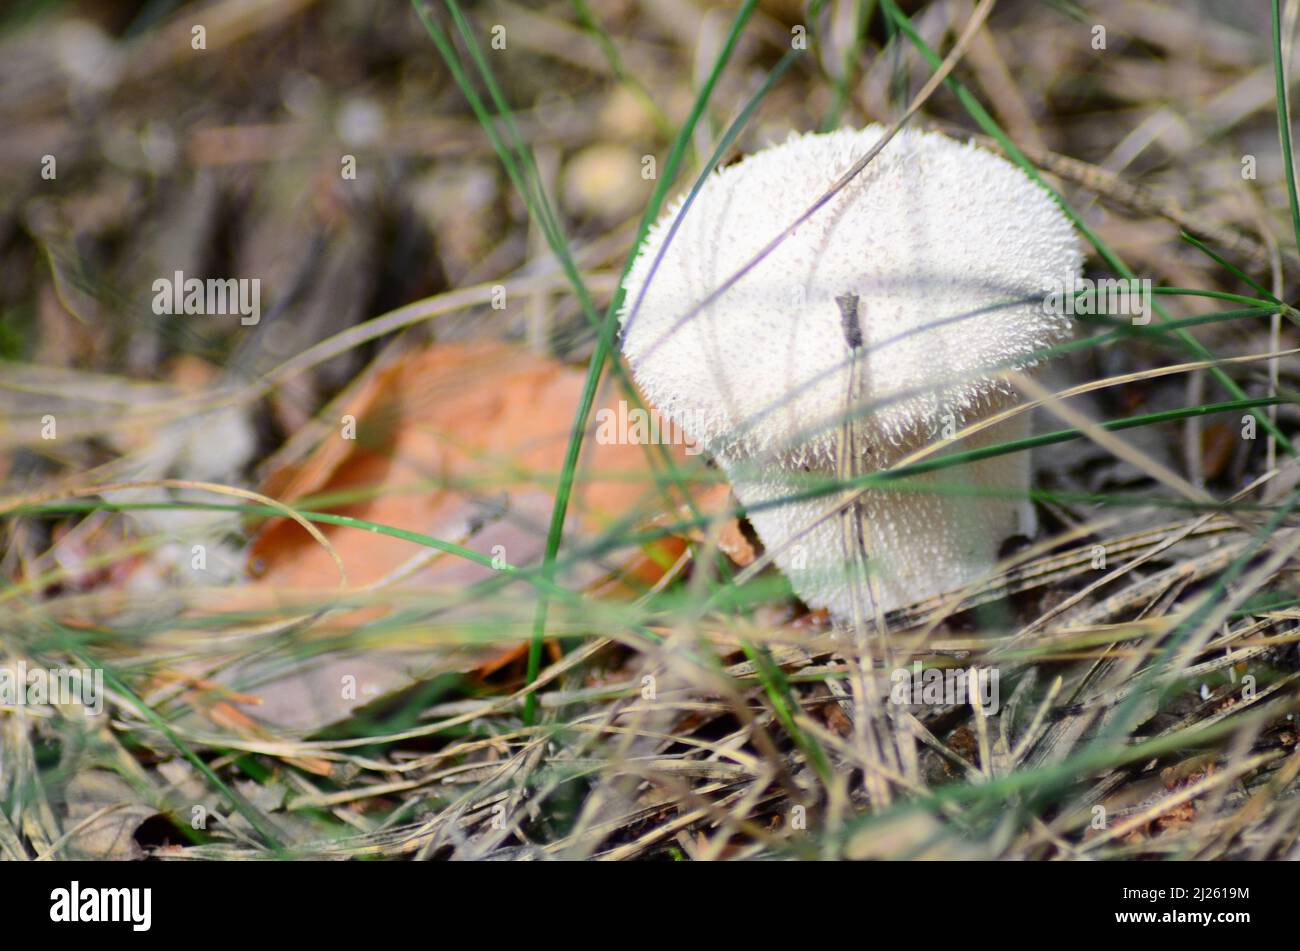 mushrooms on with latin name agaricus silvaticus in a forest glade Stock Photo